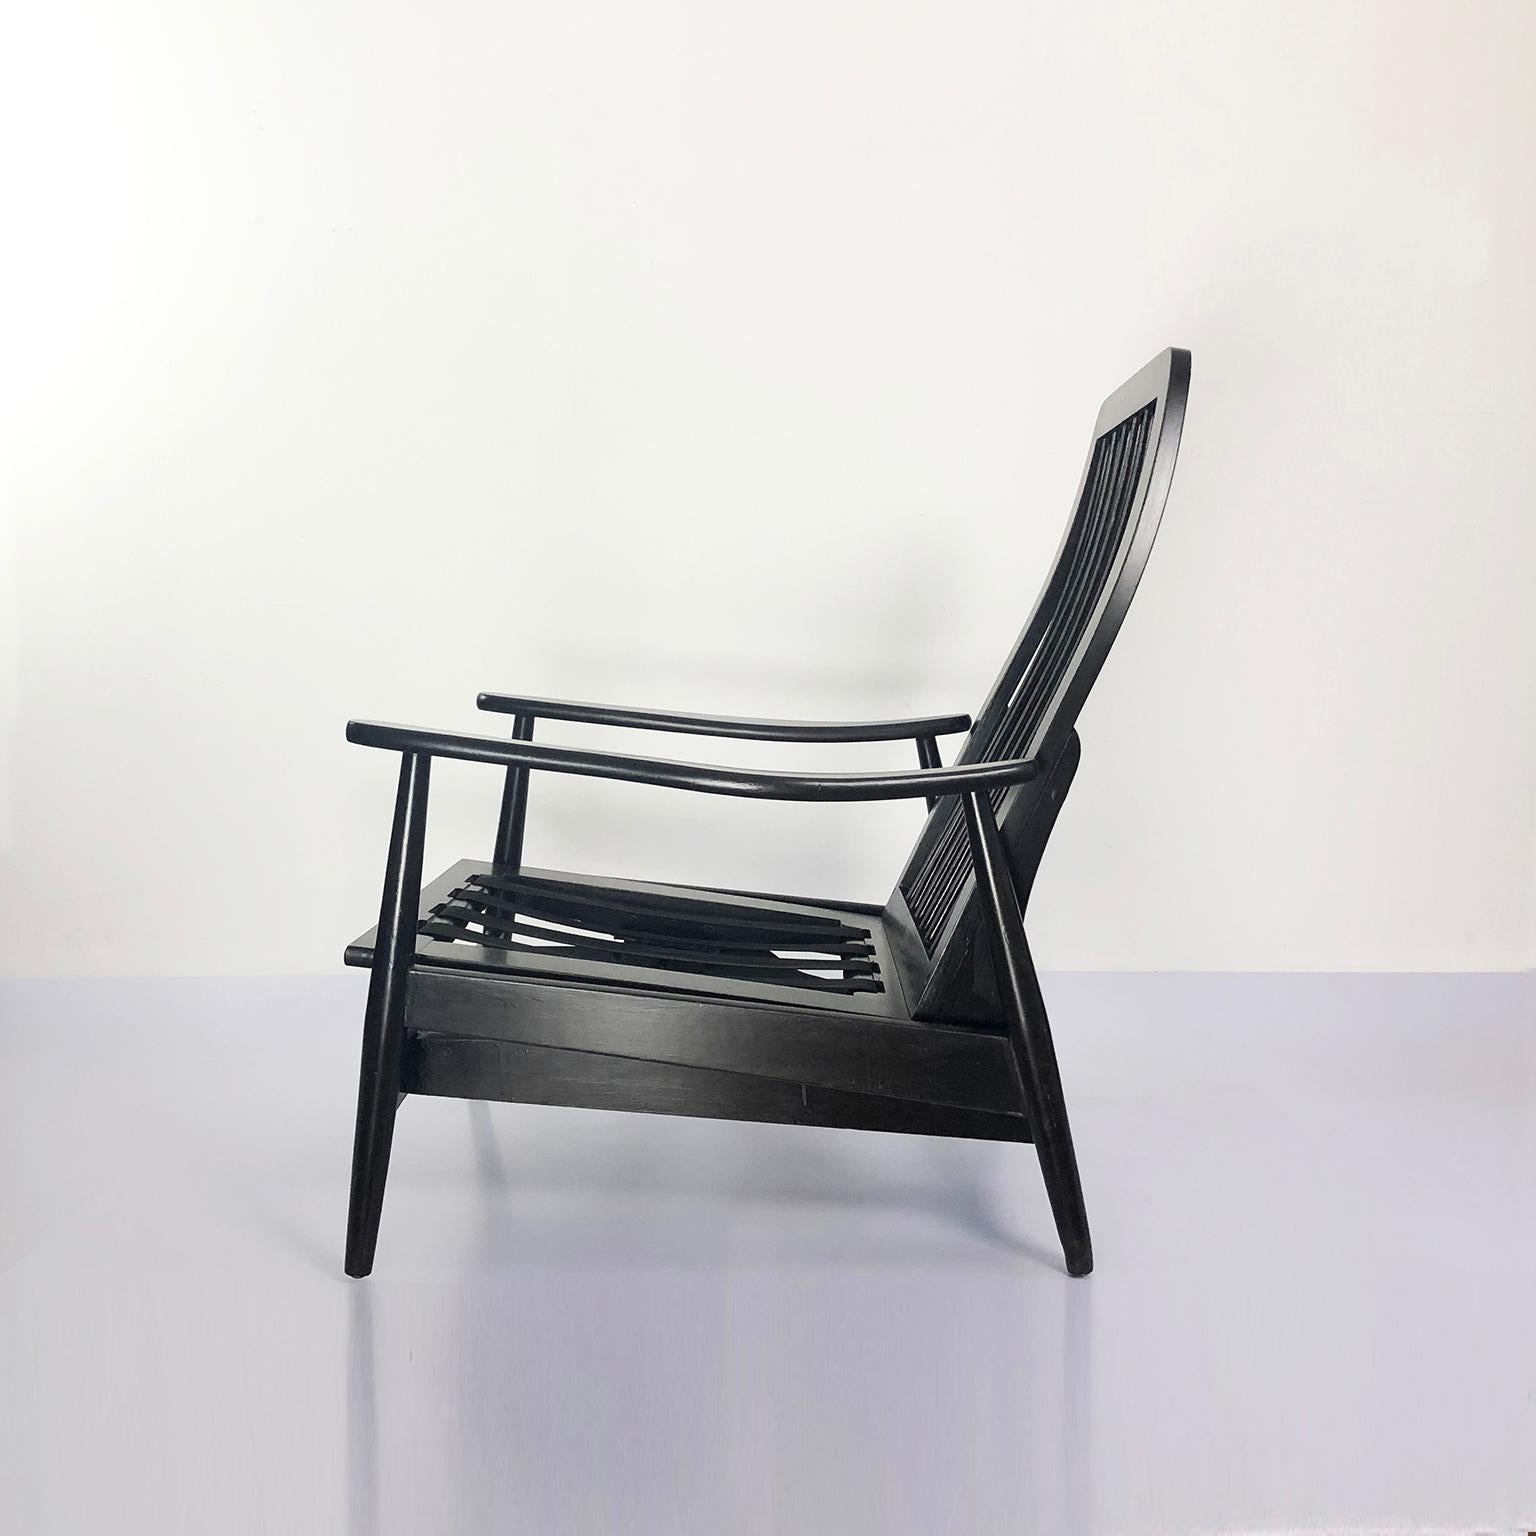 Mexican Midcentury Rocking Chair by Silleria La Malinche